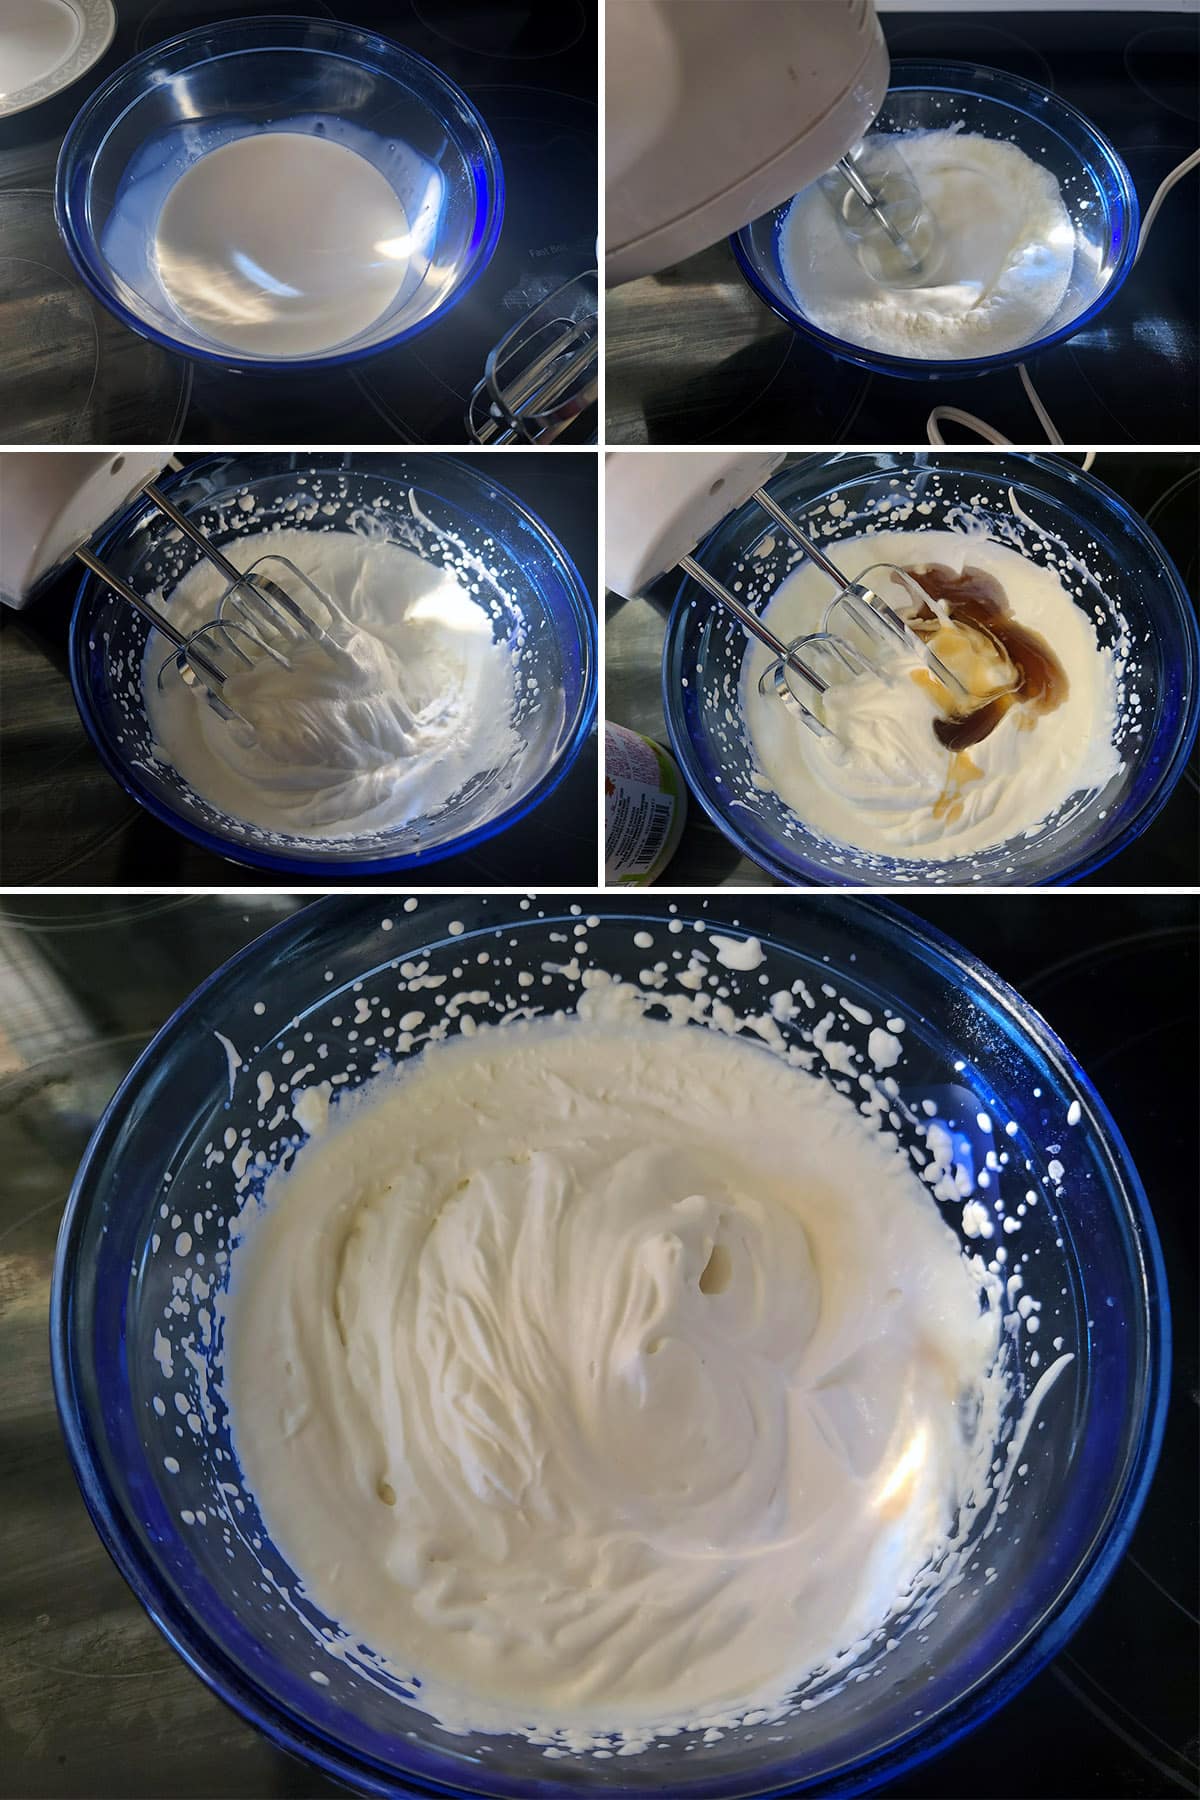 A 5 part image showing the maple syrup whipped cream being whipped together.